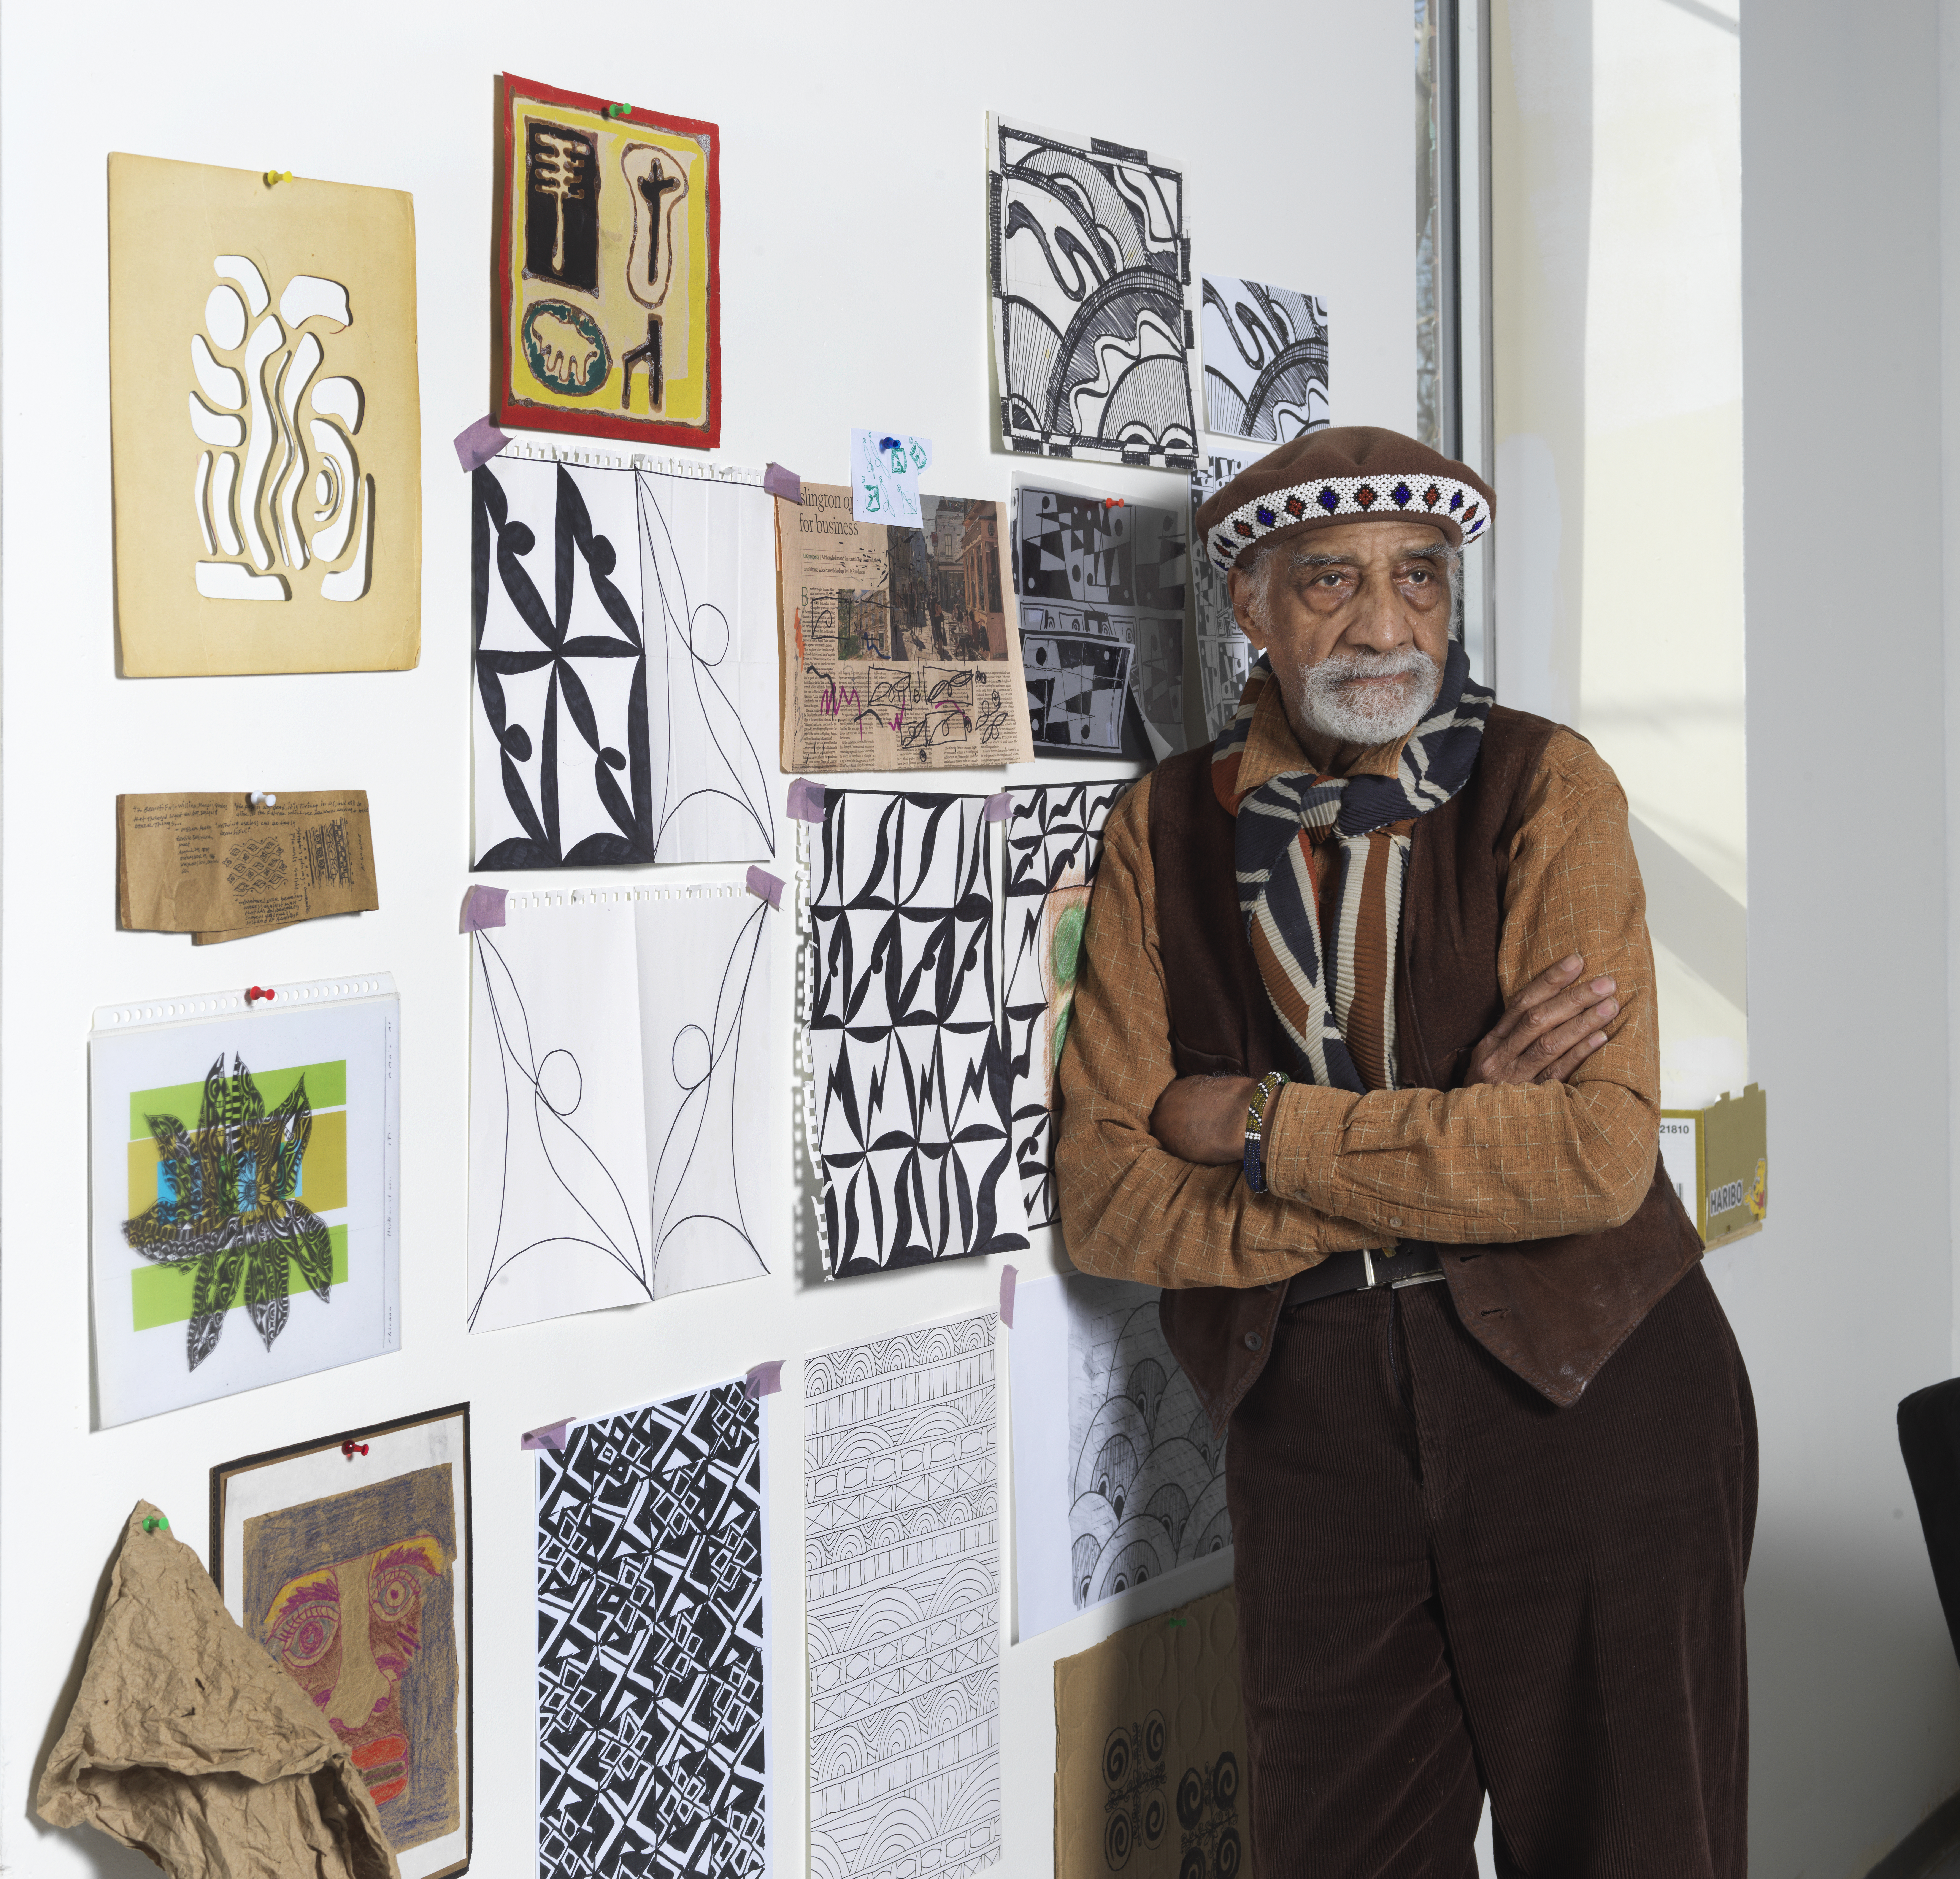 A Black man in his 80s leans against a wall covered with a collection of abstract artworks on paper. He wears a knit hat, gray goatee, button down shirt, vest, and corduroy pants.